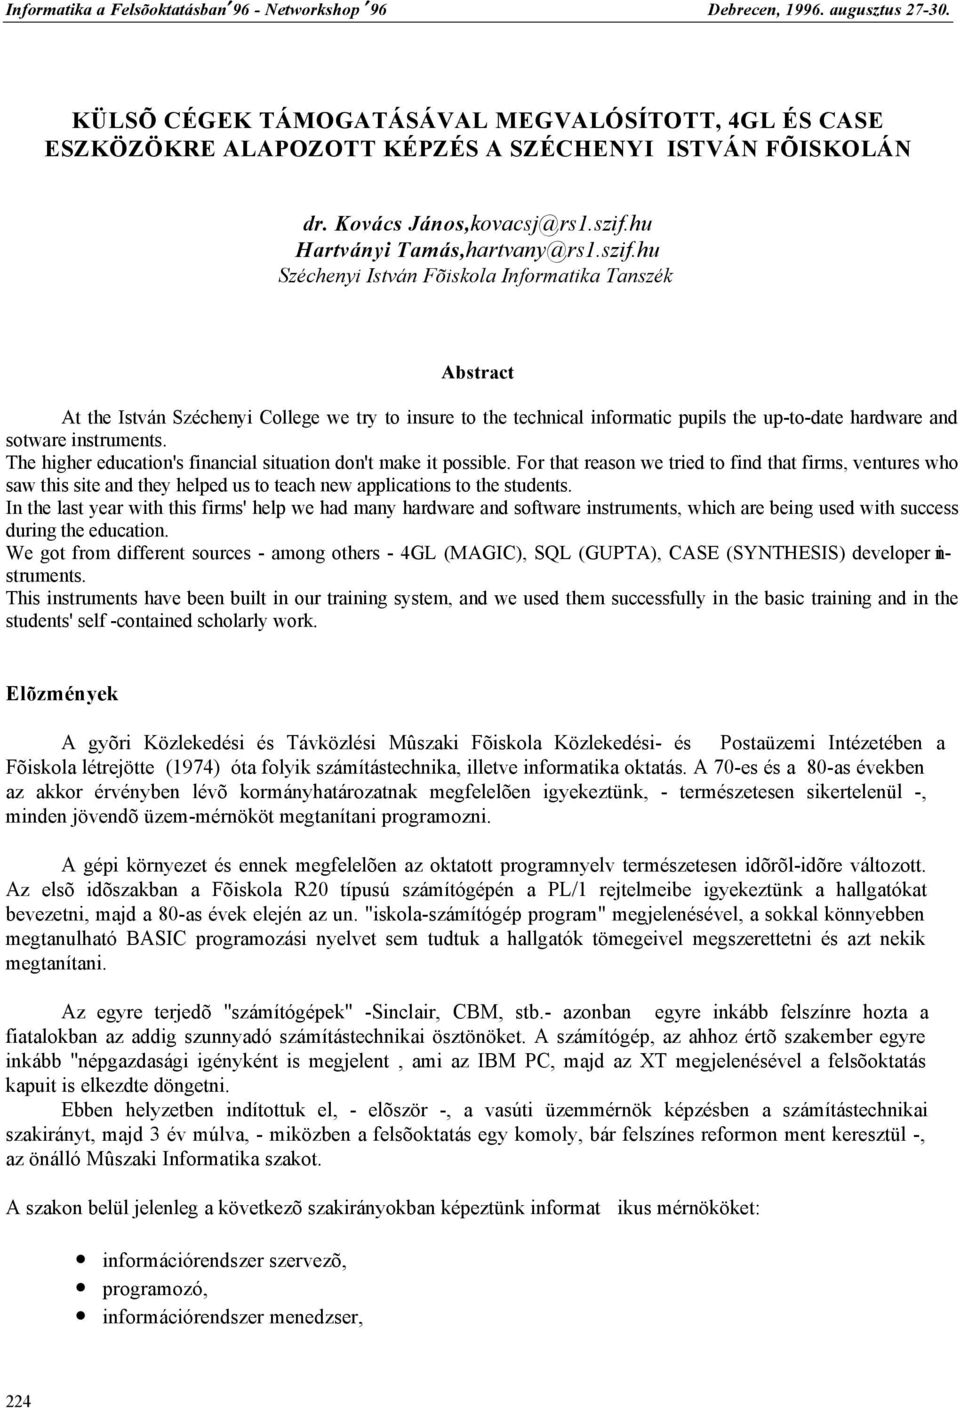 hu Széchenyi István Fõiskola Informatika Tanszék Abstract At the István Széchenyi College we try to insure to the technical informatic pupils the up-to-date hardware and sotware instruments.